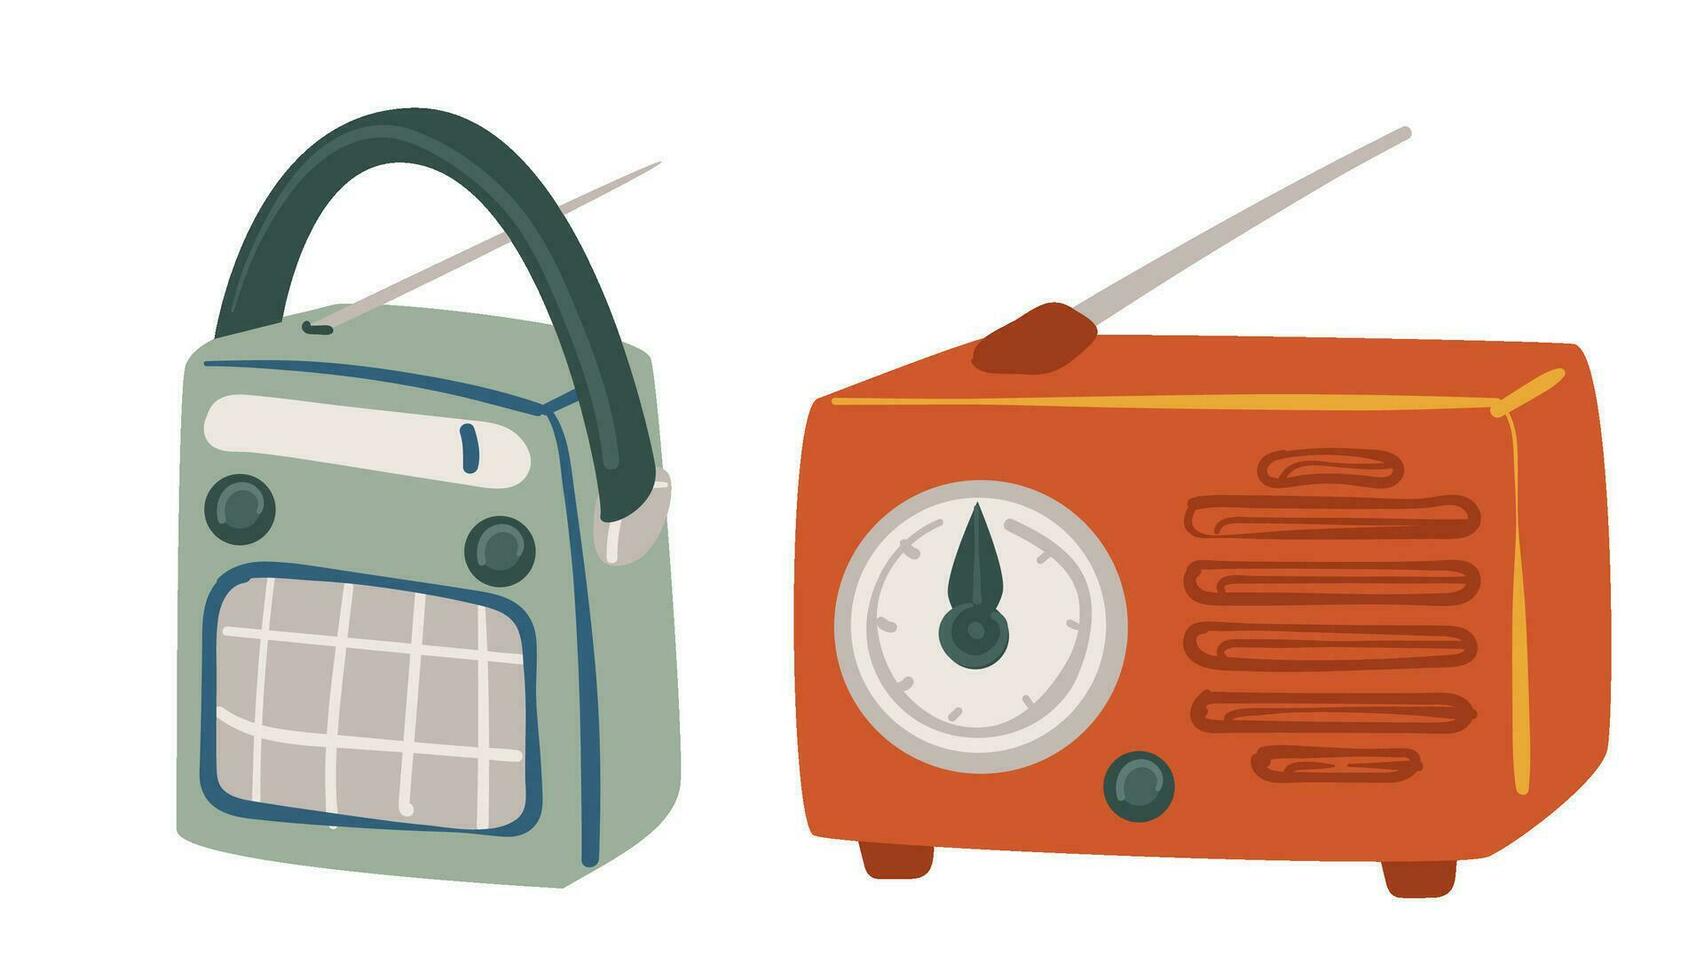 Radio with recording and playing functions retro vector